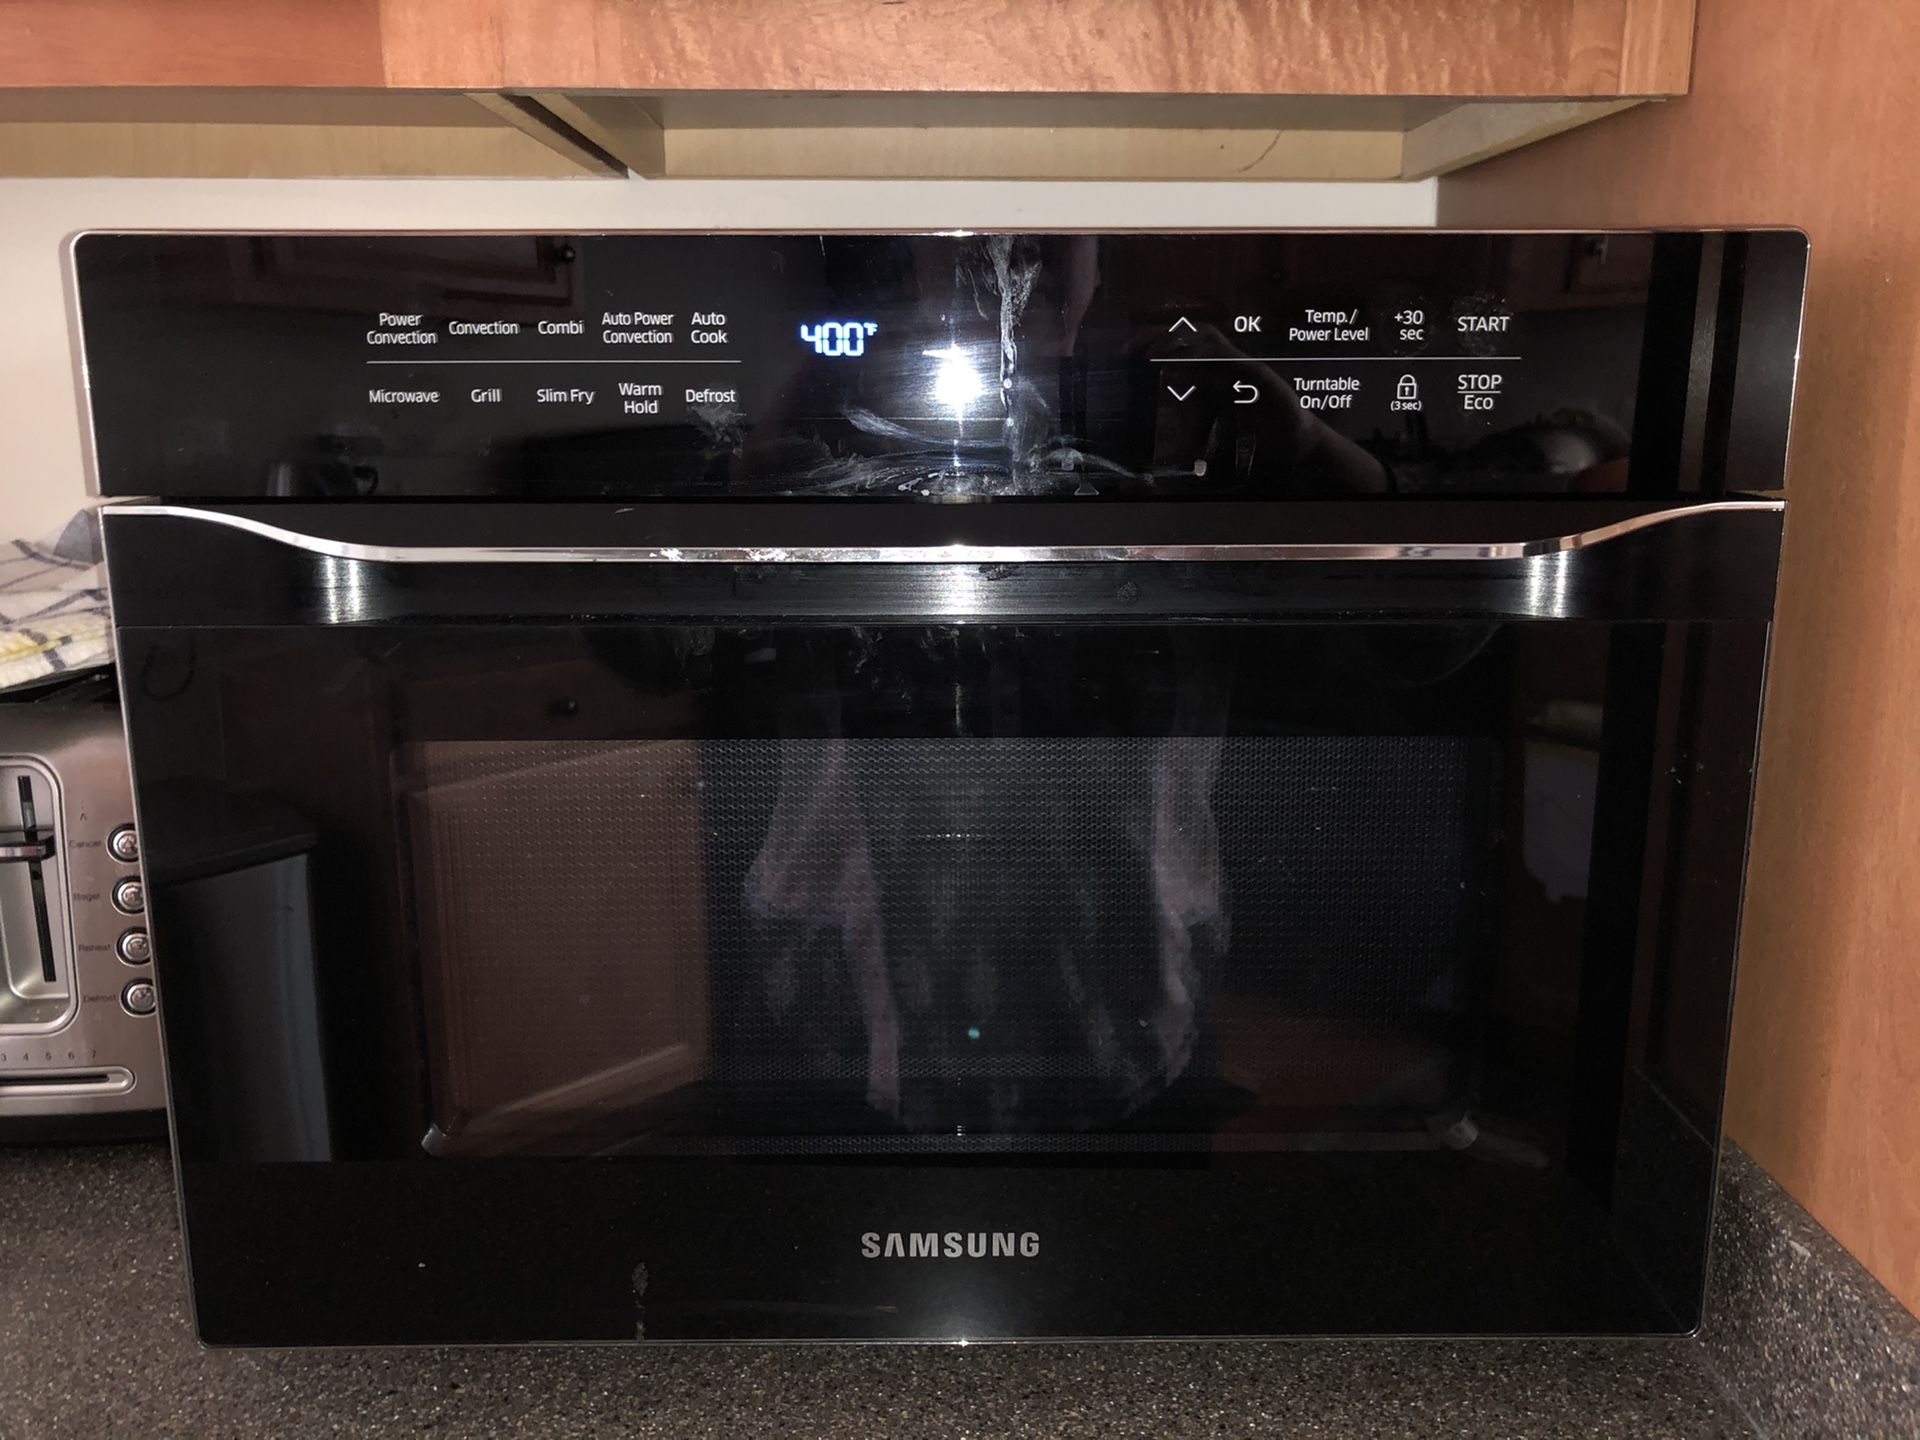 Samsung dual Convection/Microwaves. Excellent condition.